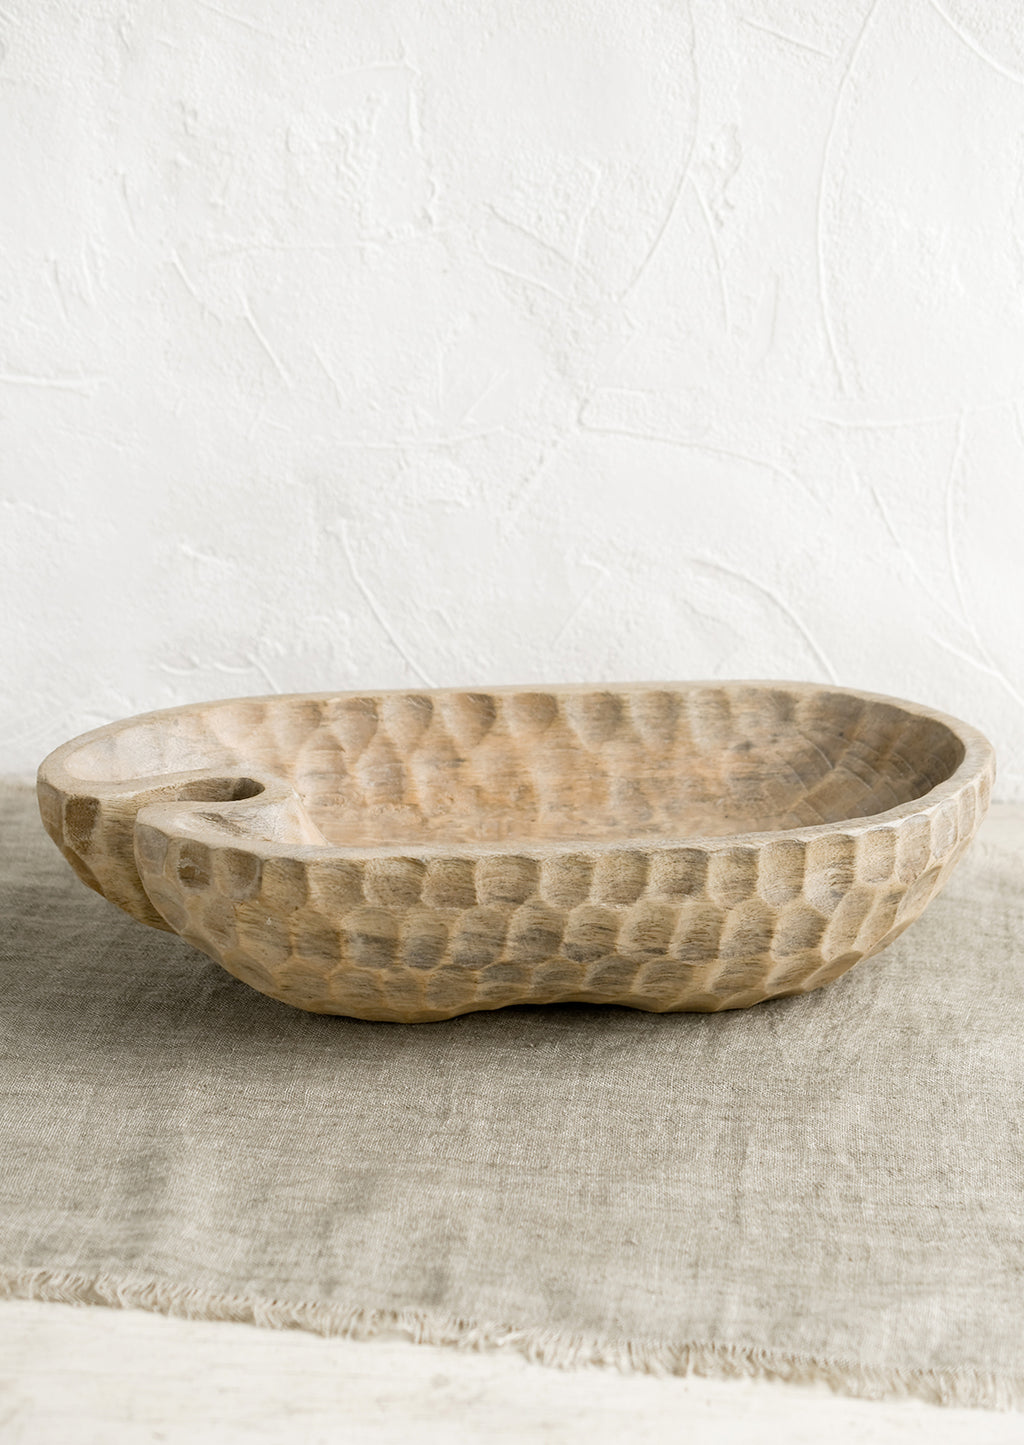 2: A light wooden bowl in organic, oblong shape, with notched texture.